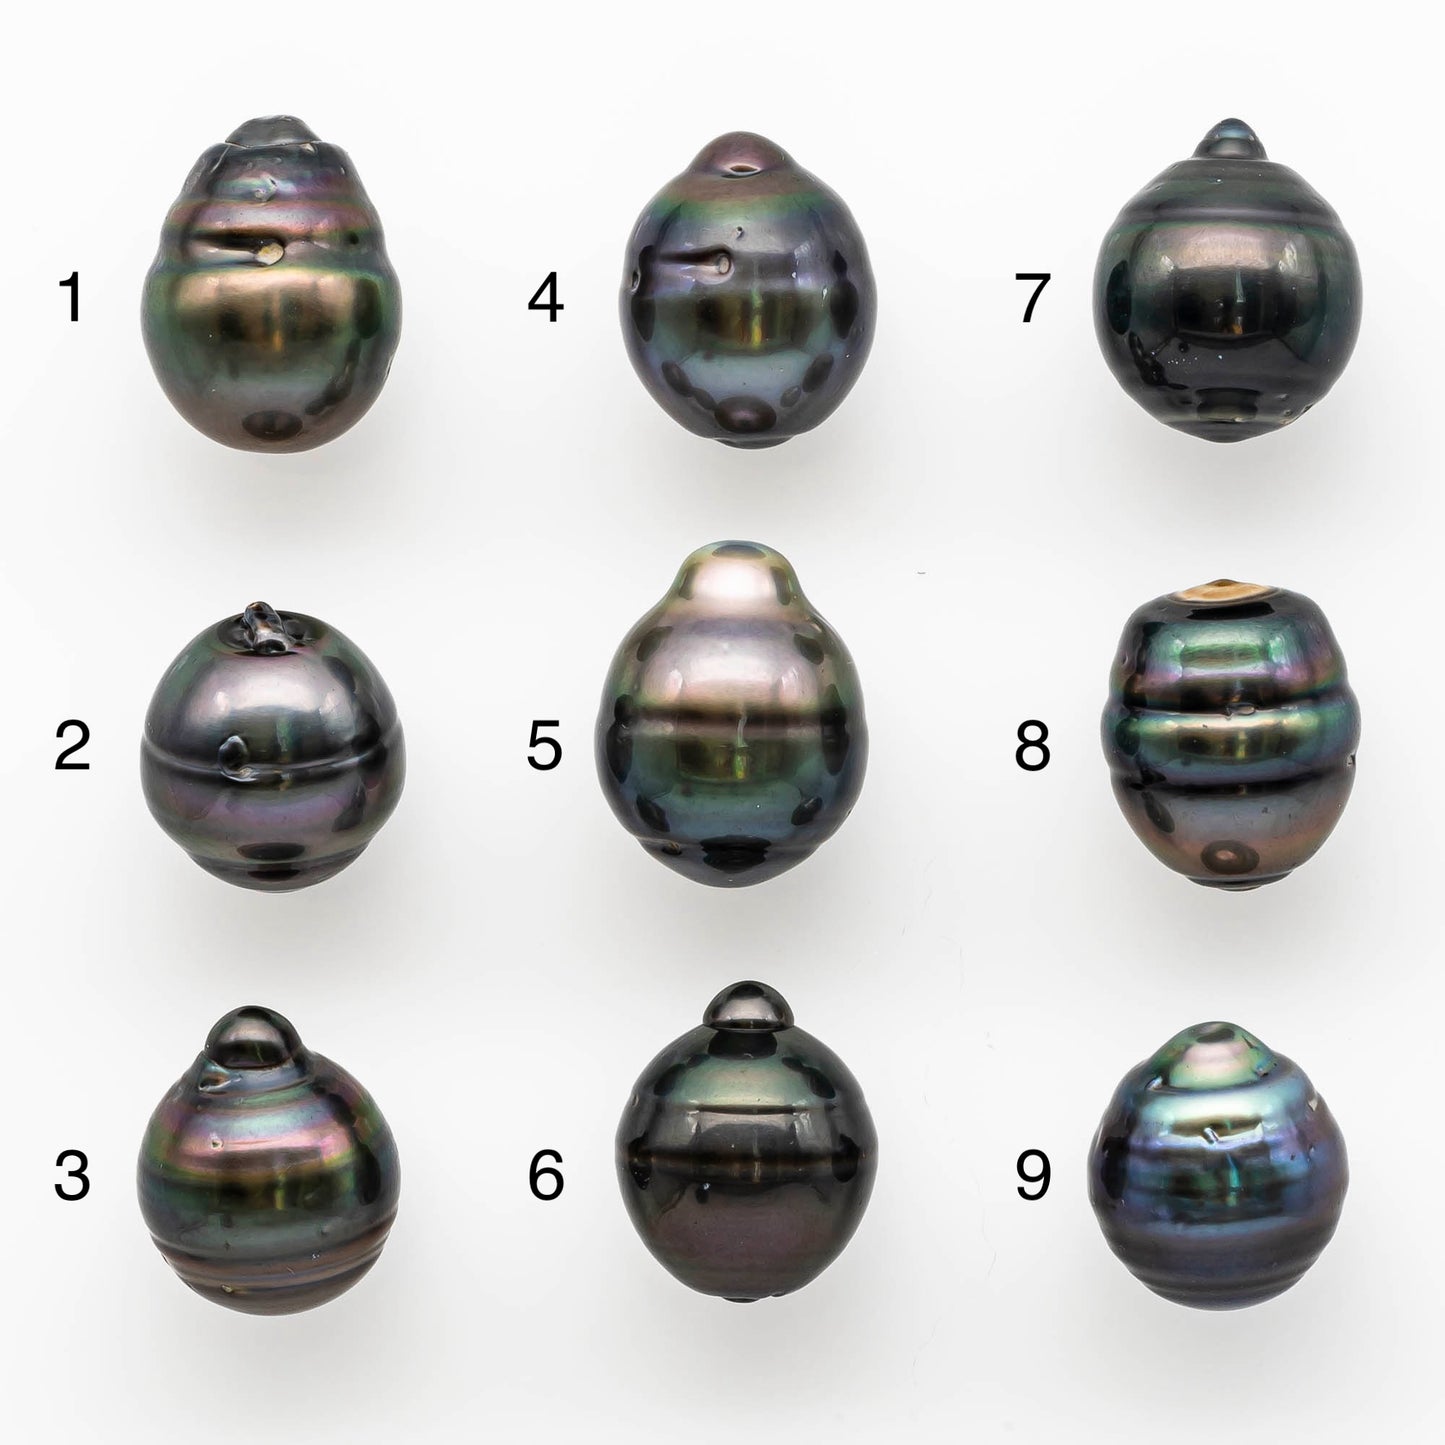 13-14mm Tahitian Pearl Drop Undrilled Loose Single Piece in High Luster and Natural Color with Minor Blemishes, SKU # 1889TH